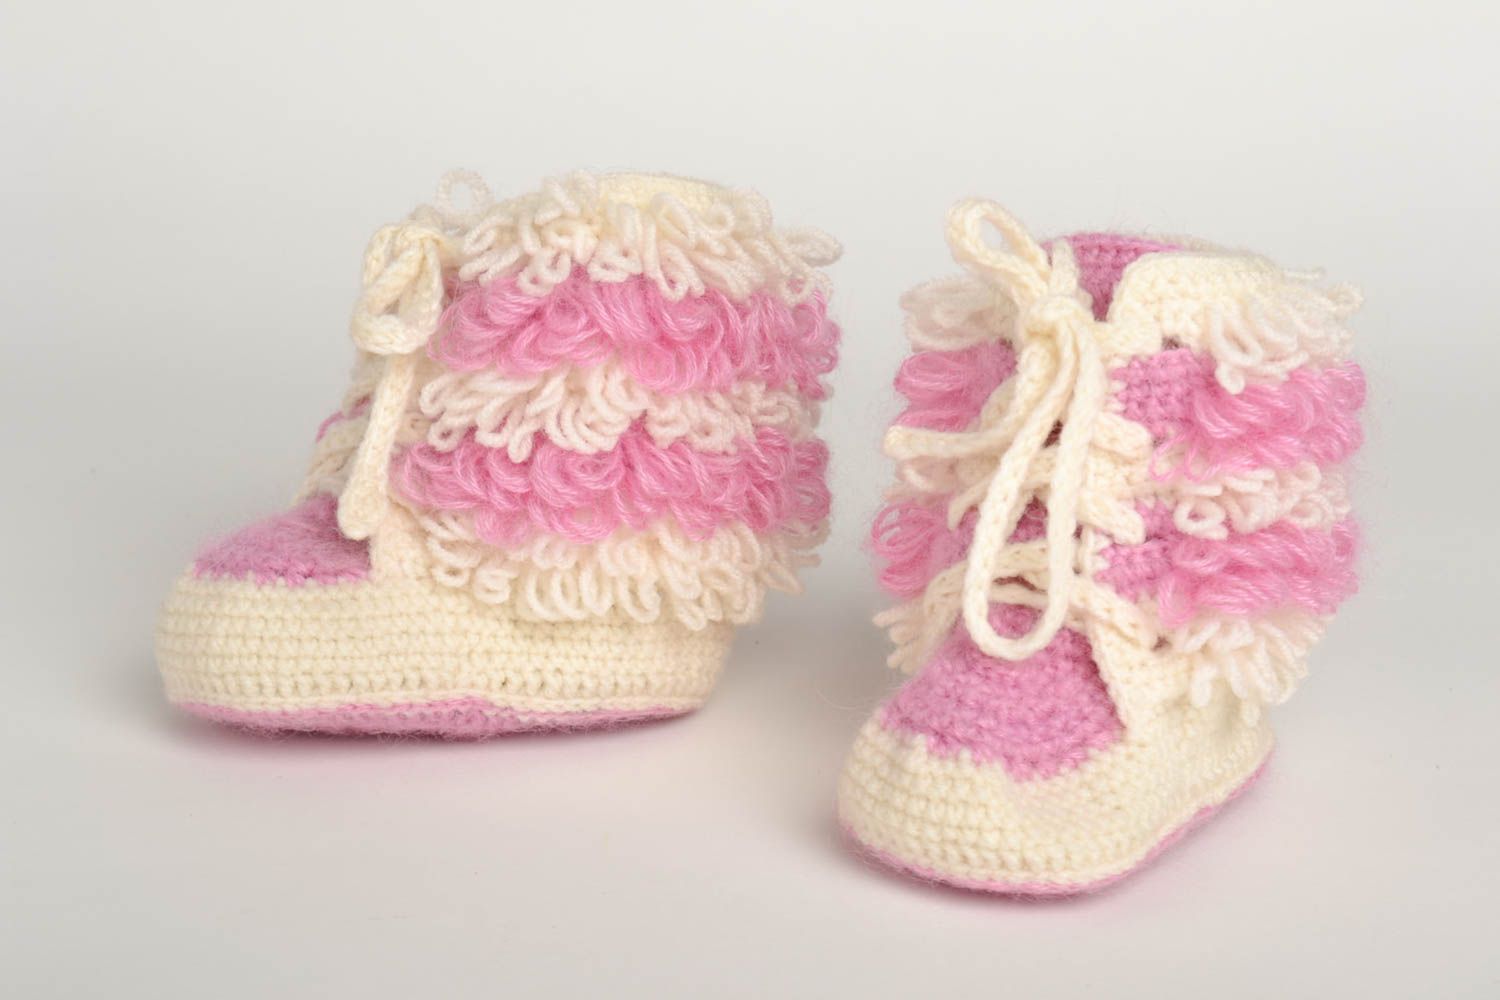 Handmade crochet baby booties baby bootees design fashion accessories for kids photo 2